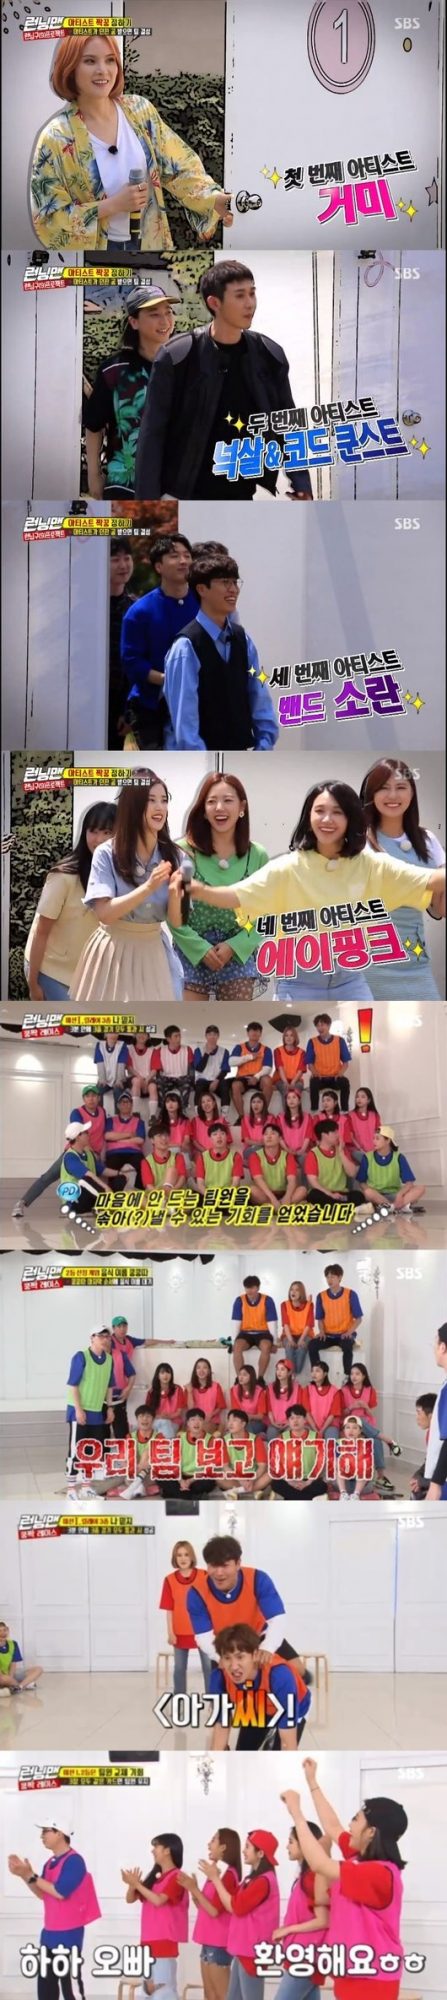 SBS Running Man has kept its No. 1 position in the same time zone of 2049 Target Viewpoint with the release of the collaboration The Artists to hold a domestic fan meeting for the 9th anniversary.According to Nielsen Korea, the ratings agency, Running Man, which aired on the 7th, soared to 8.7% of the highest audience rating per minute, and the 2049 target audience rating, which is an important indicator of major advertising officials, was 4% (based on the second part of the audience rating of Seoul Capital Area households), ranking first in the same time zone, surpassing MBCs Masked Wang and KBS2s Donkey Ears.The average audience rating was 4.9% in the first part and 6.7% in the second part (based on the audience rating of the Seoul Capital Area household).The broadcast was decorated with the Running Zone Project, and the top four artists who will hold a 9th anniversary Korean fan meeting with the members were released earlier.The artist of the four teams was spider, knock-and-code kunst, band disturbance, and girl group Apink; the artist team 1 and two members paired to set the first pair.The OST Queen spider first appeared and was paired with Kim Jong-kook and Lee Kwang-soo.Nunsal & Cod Kunst has been in contact with Song Ji-hyo and Haha.The band disturbance was paired with Yoo Jae-Suk, Jeon So-min, and girl group Apink with Ji Suk-jin and Yang Se-chan.Especially, as the four-year-old and Song Ji-hyo became a hot topic as they resembled each other, the appearance of the two together drew a big smile.They played a kung-kung-kuk race in a total of three rounds of competitions, with the final team being able to take the stage as a joint team, and all teams playing without concessions.In the first showdown, the spiders, Kim Jong-kook and Lee Kwang-soo teams took first place and did not change their team members.However, the second-ranked Apink, Ji Suk-jin and Yang Se-chan teams did not agree and the team members changed.Eventually, Yoo Jae-Suk and Haha were paired with Apink, which had a top rating of 8.7%, taking the best minute.Next weeks broadcast will reveal the final results of the Colabo Race.